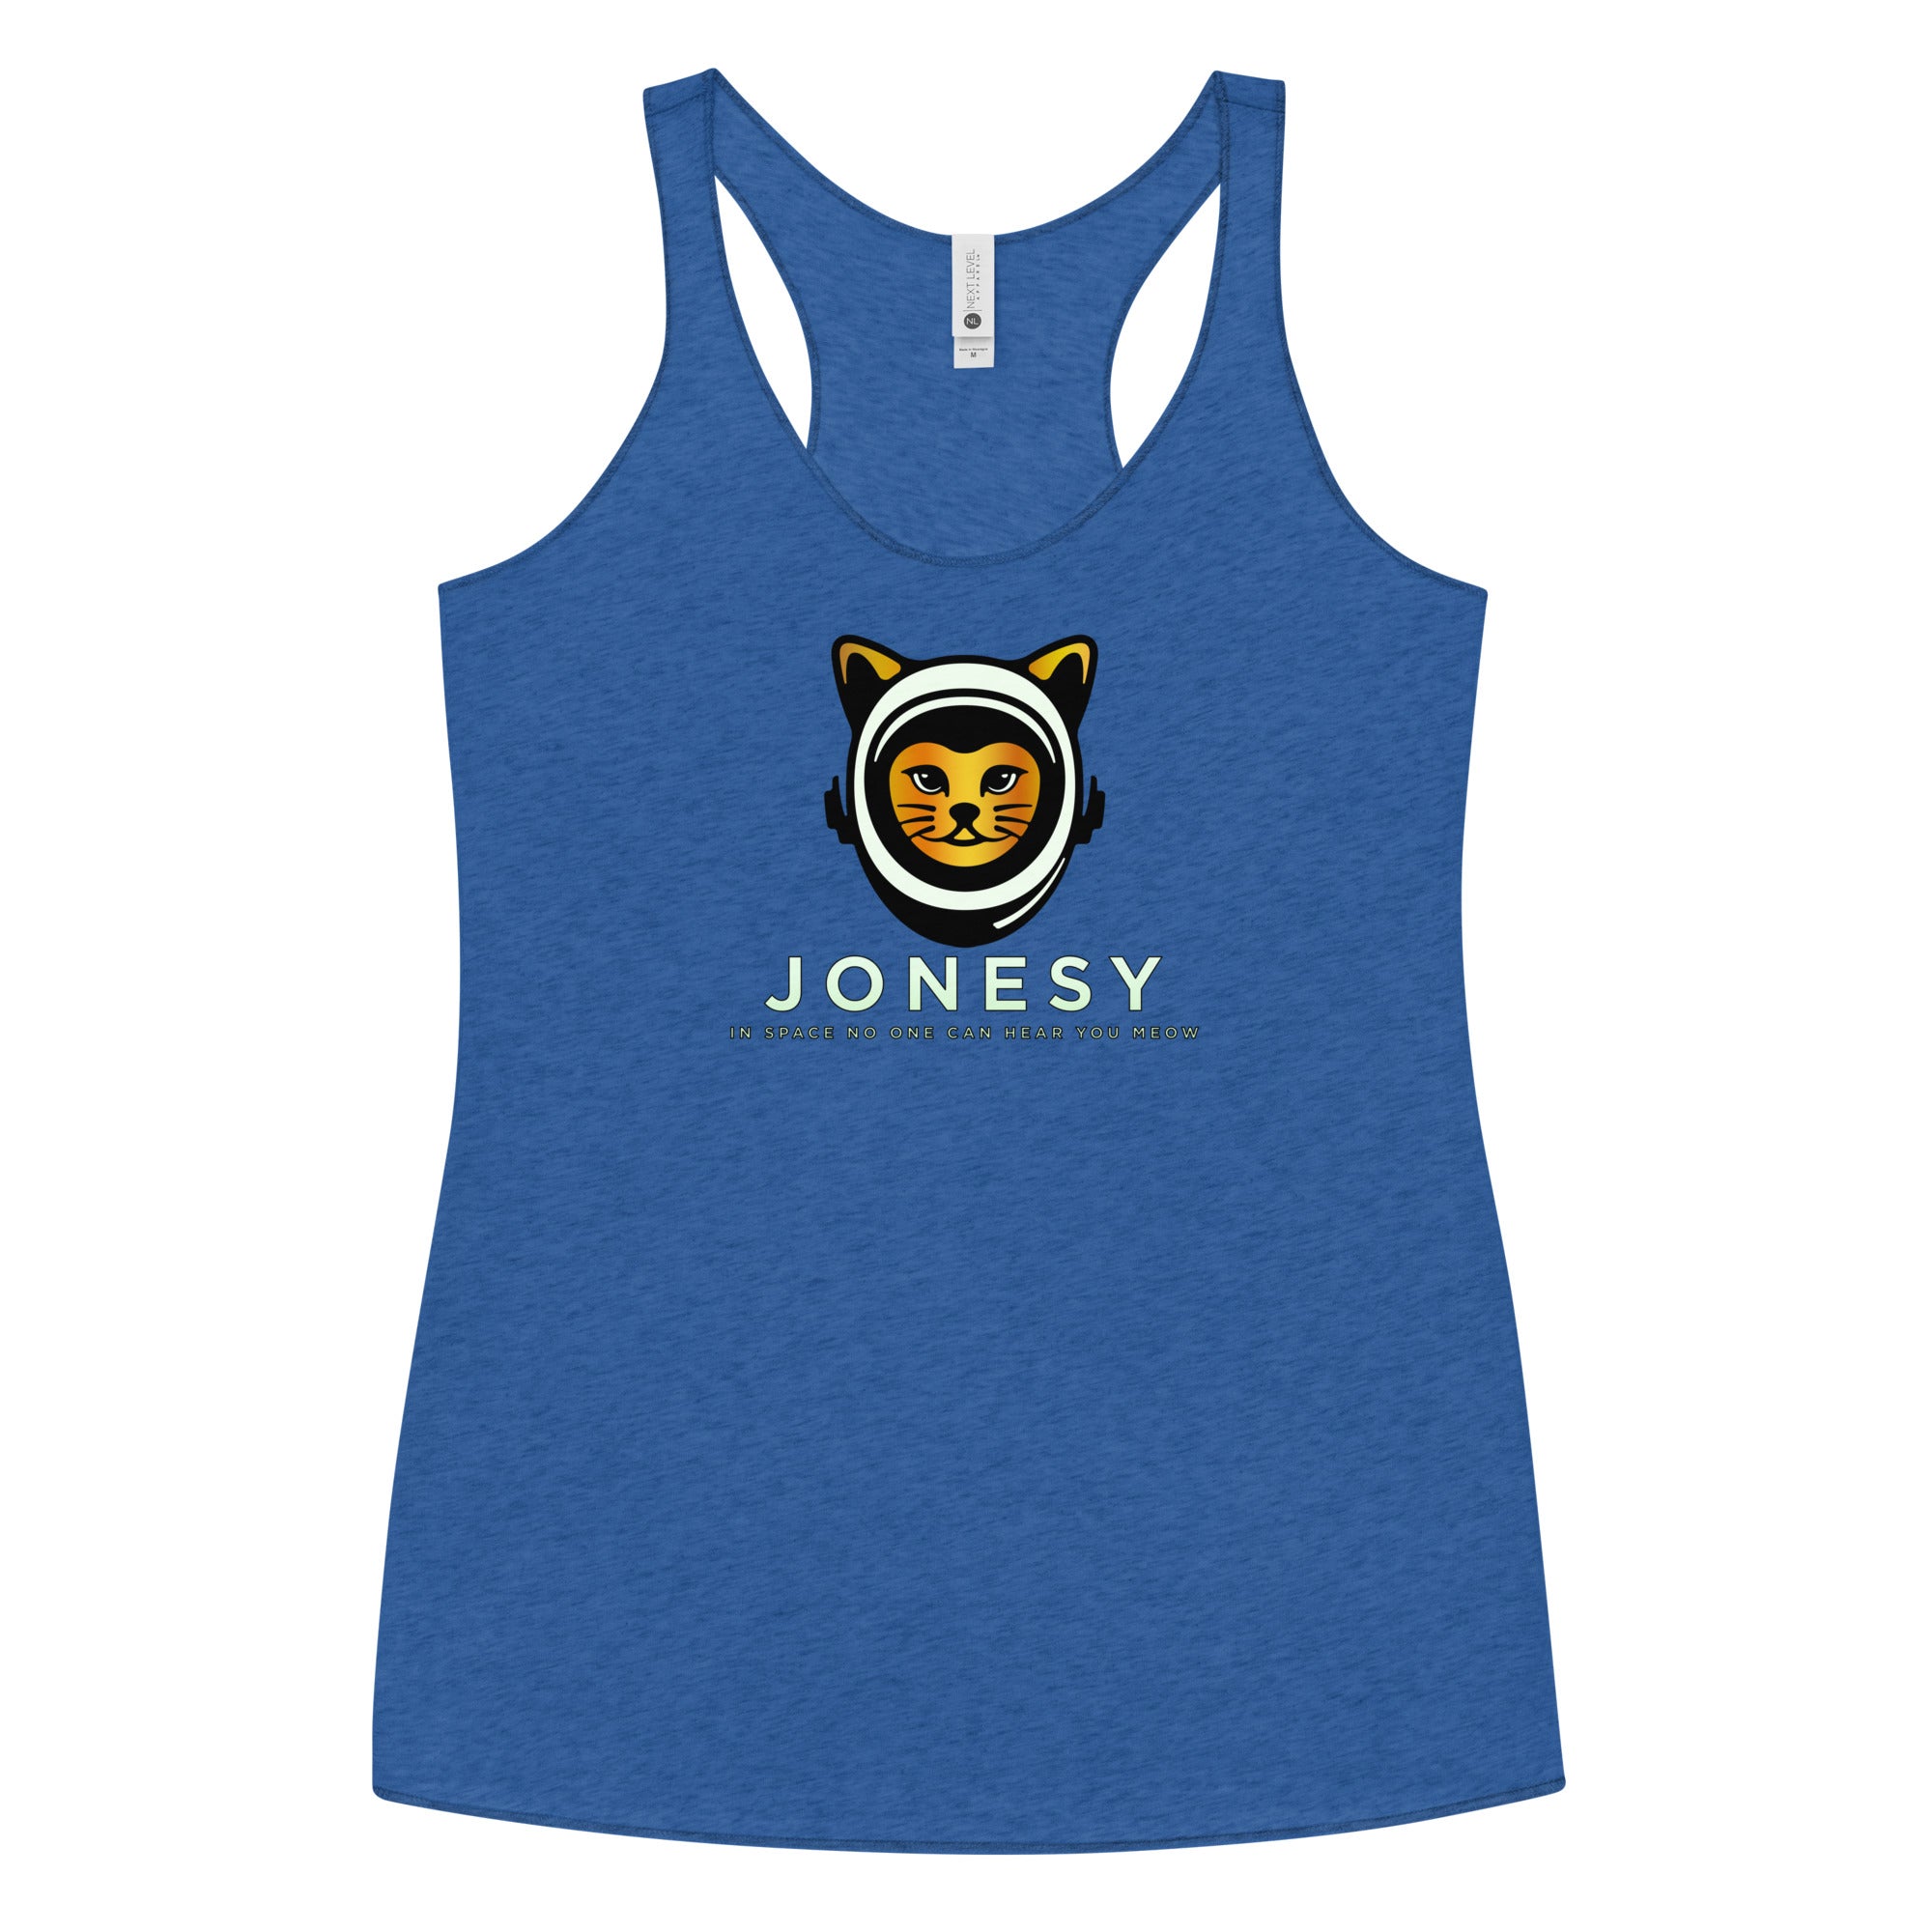 a women's tank top with a logo on it